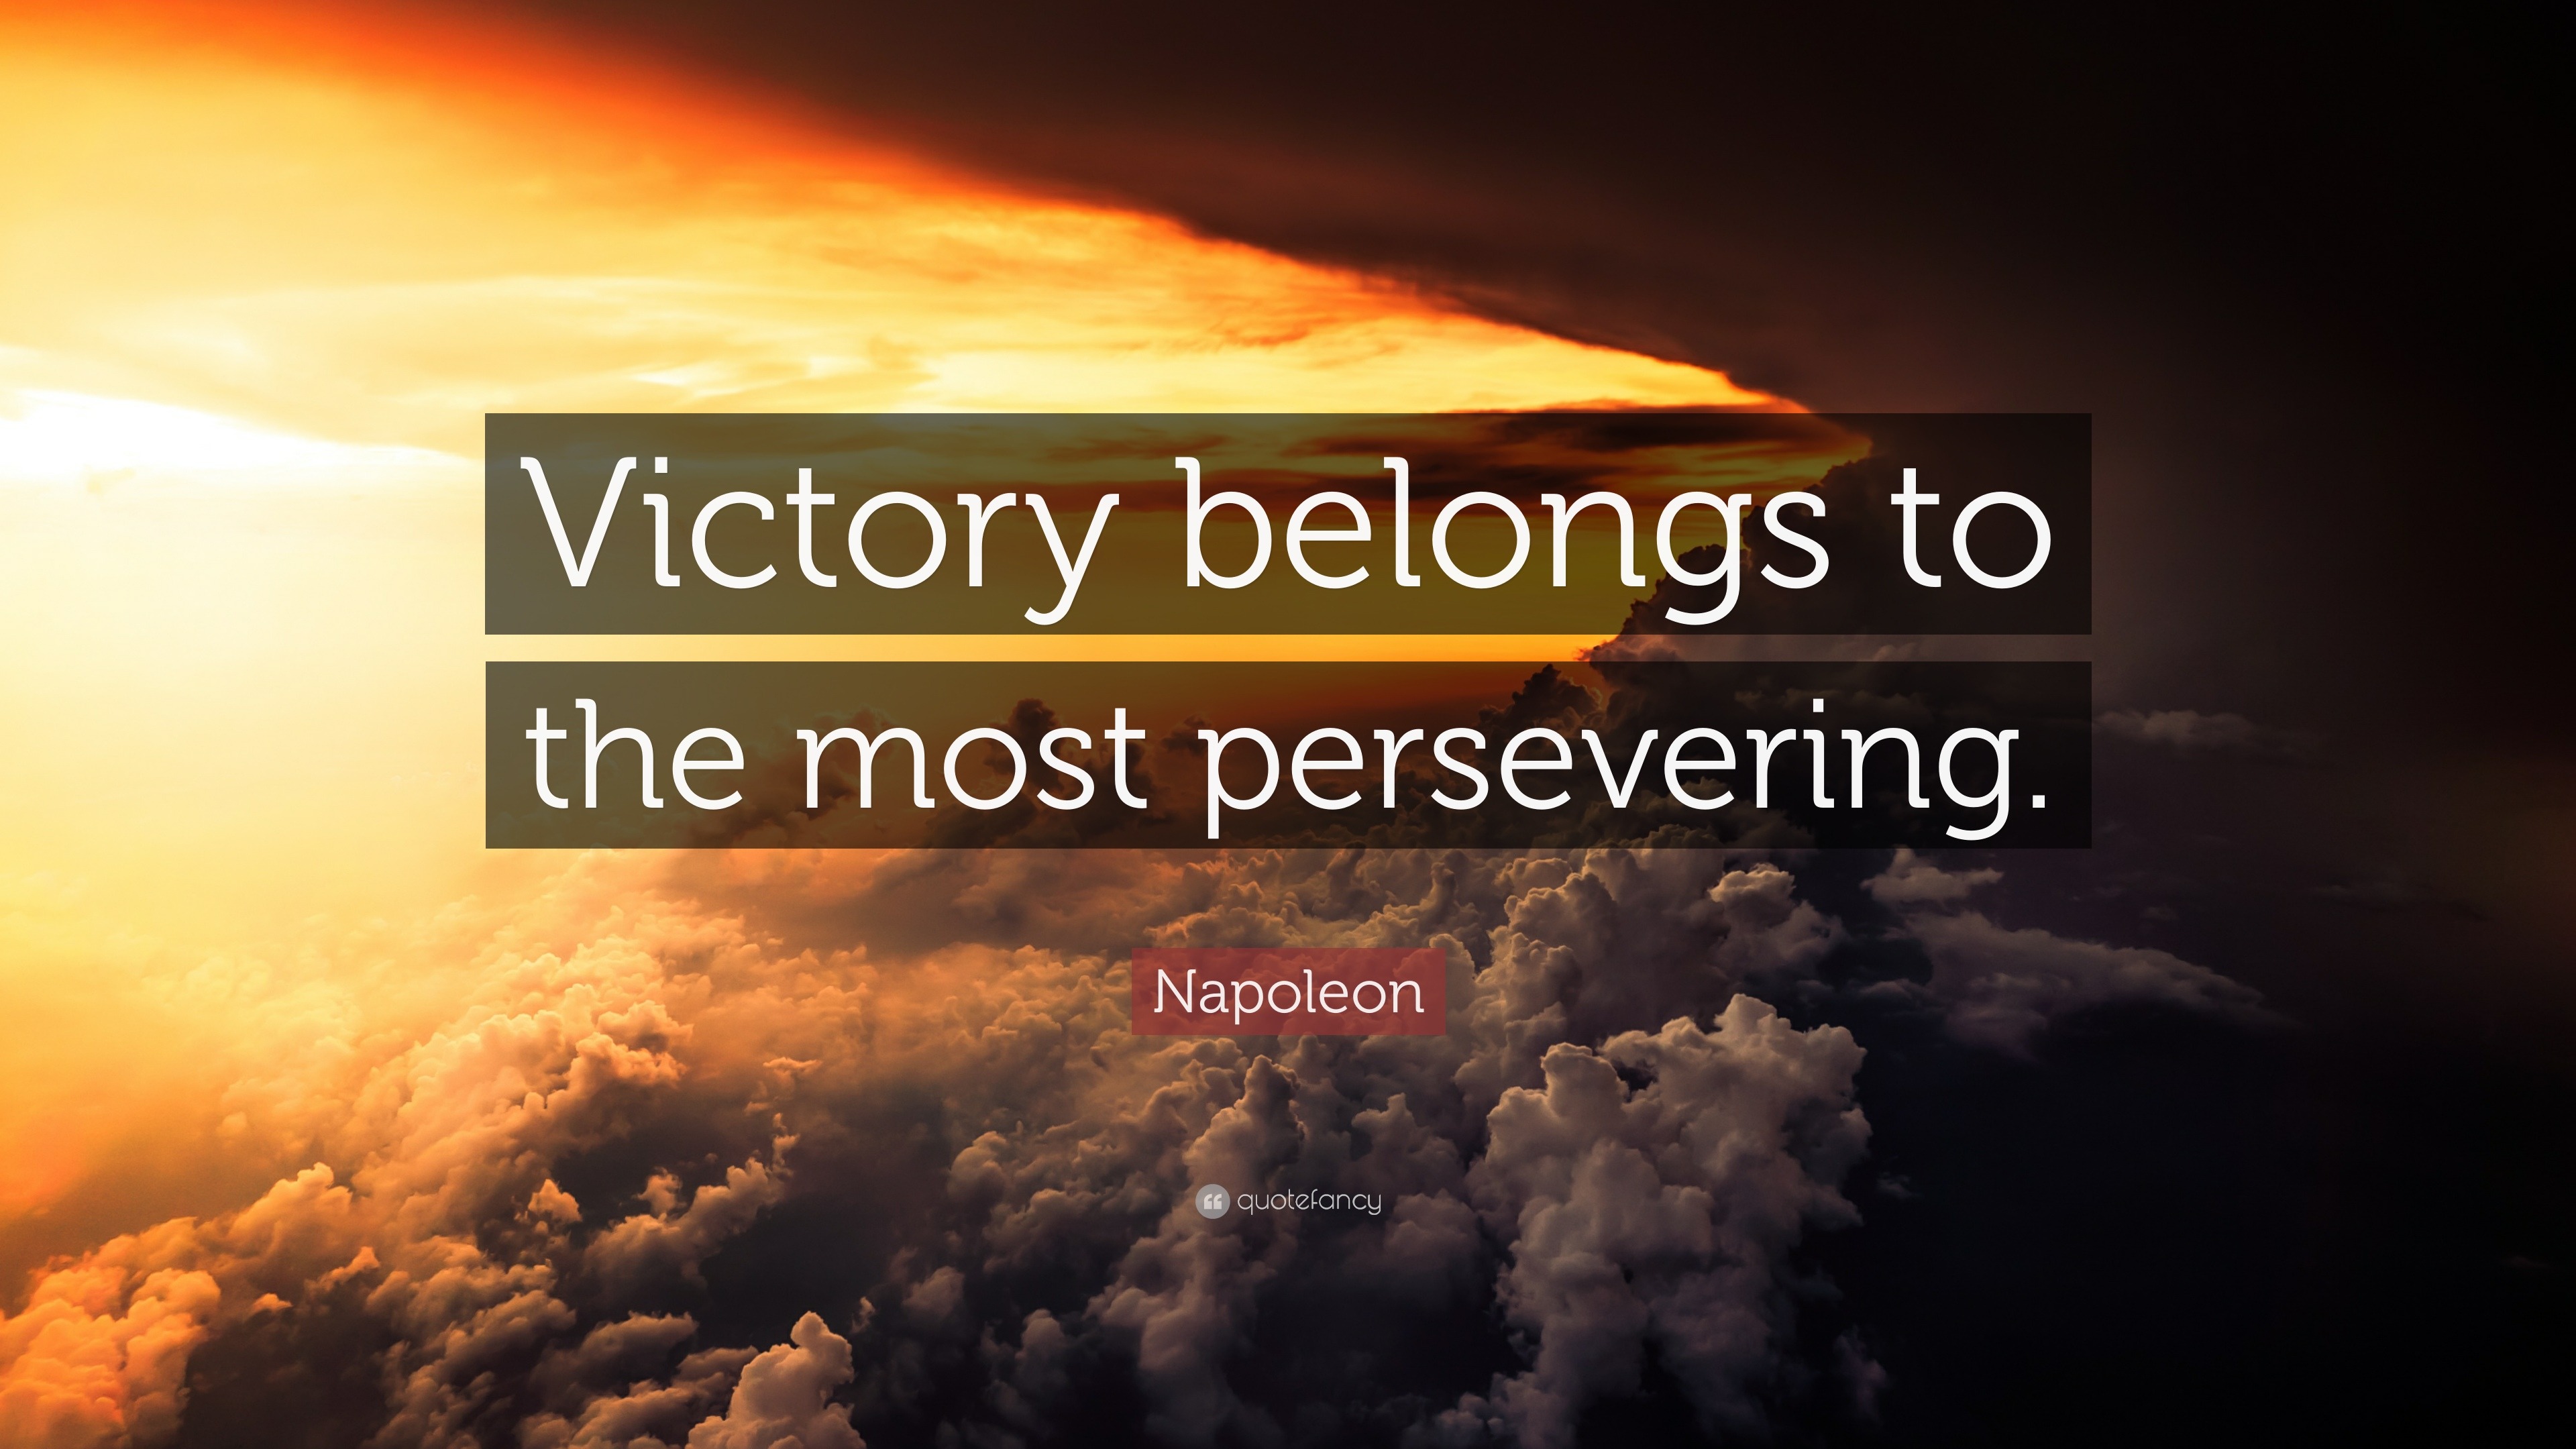 Napoleon Quote: “Victory belongs to the most persevering.”